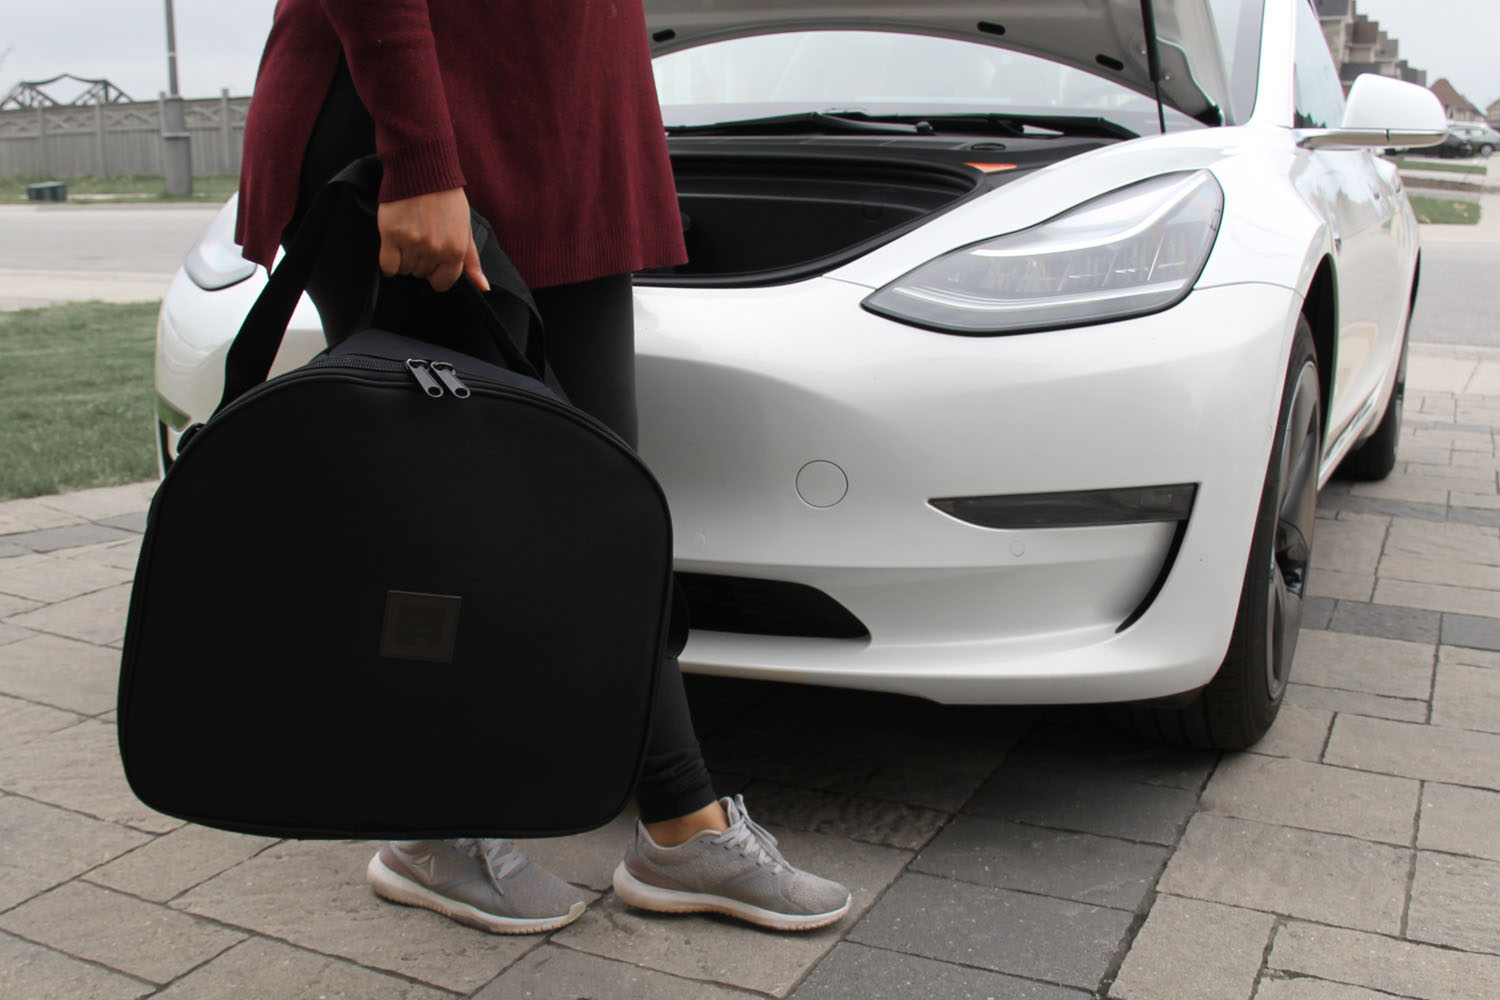 Model 3 luggage bag carry in trunk